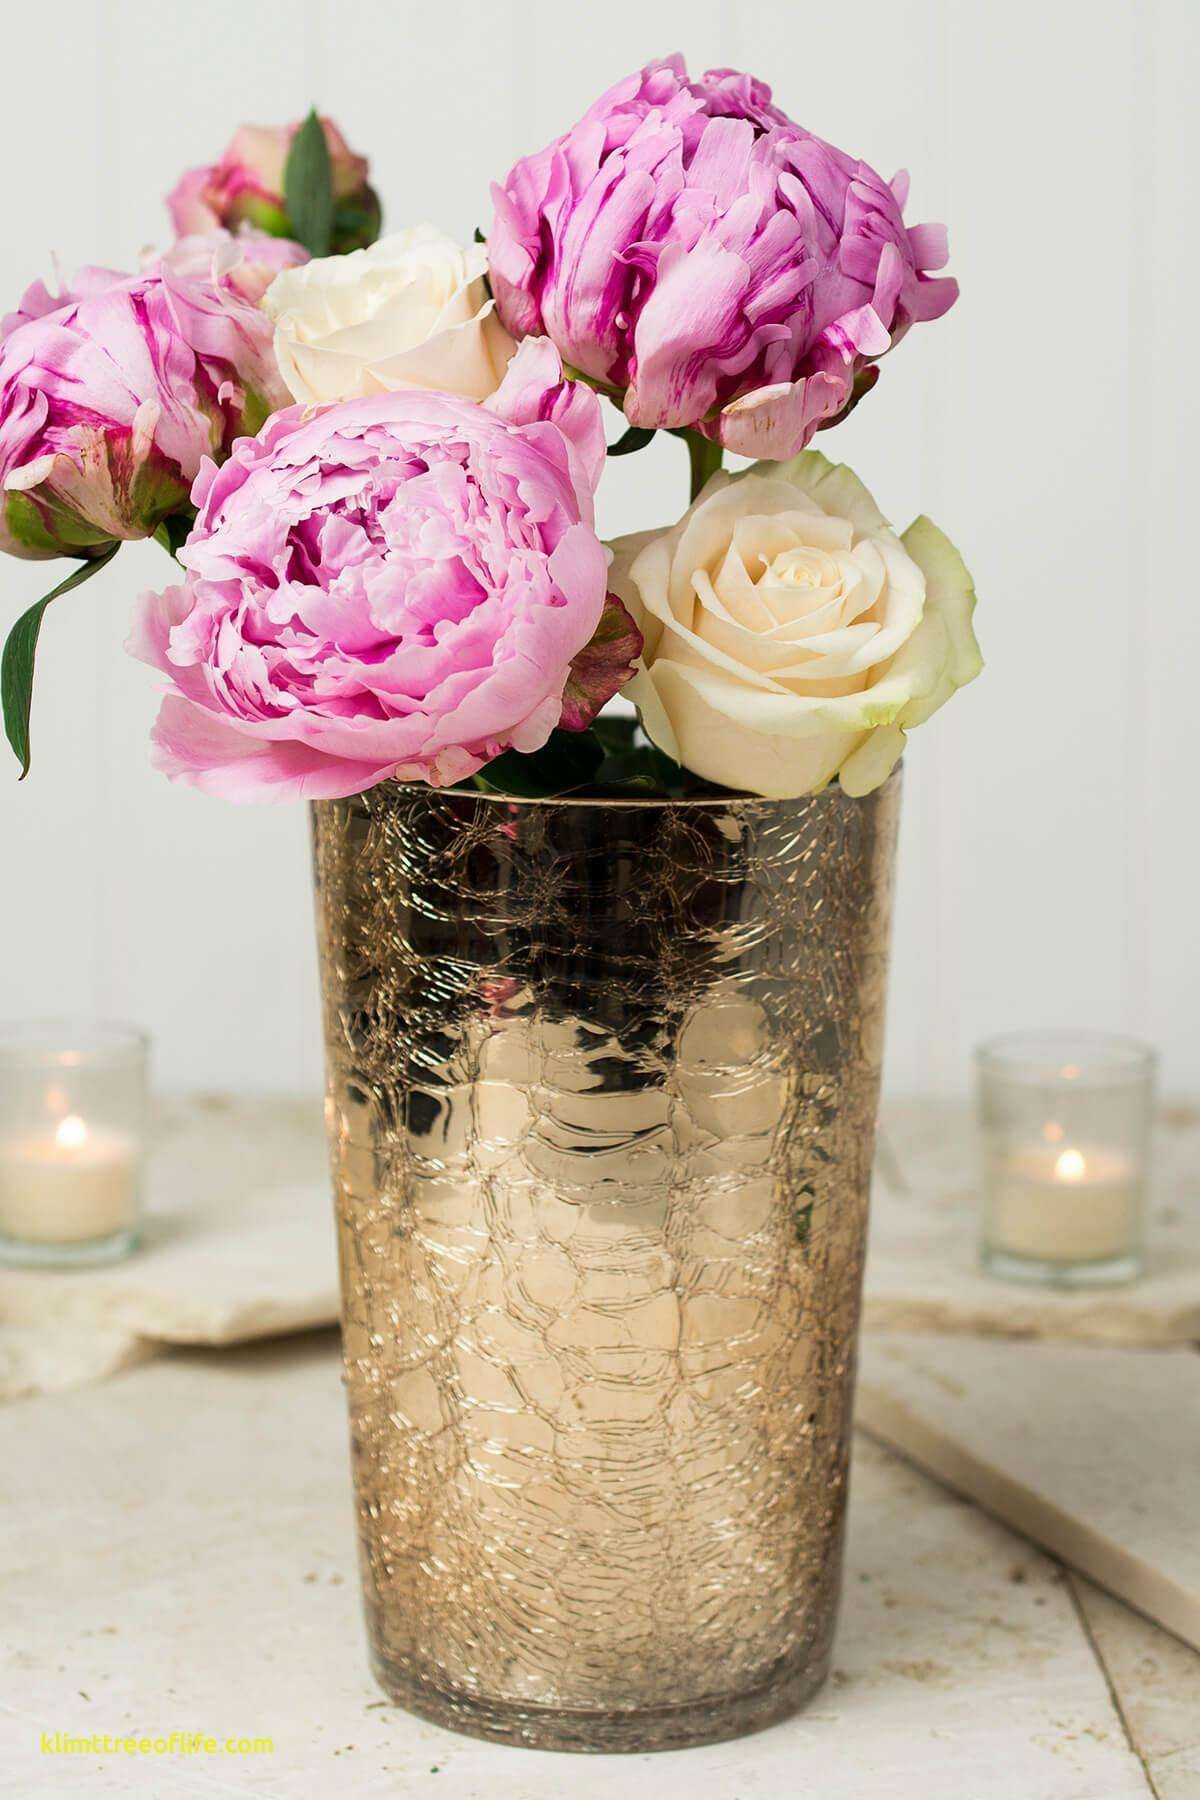 24 Nice Tin Can Vase Ideas 2024 free download tin can vase ideas of 23 elegant flower vase using recycled materials flower decoration for flower vase using recycled materials fresh 41 elegant flower arrangement ideas image